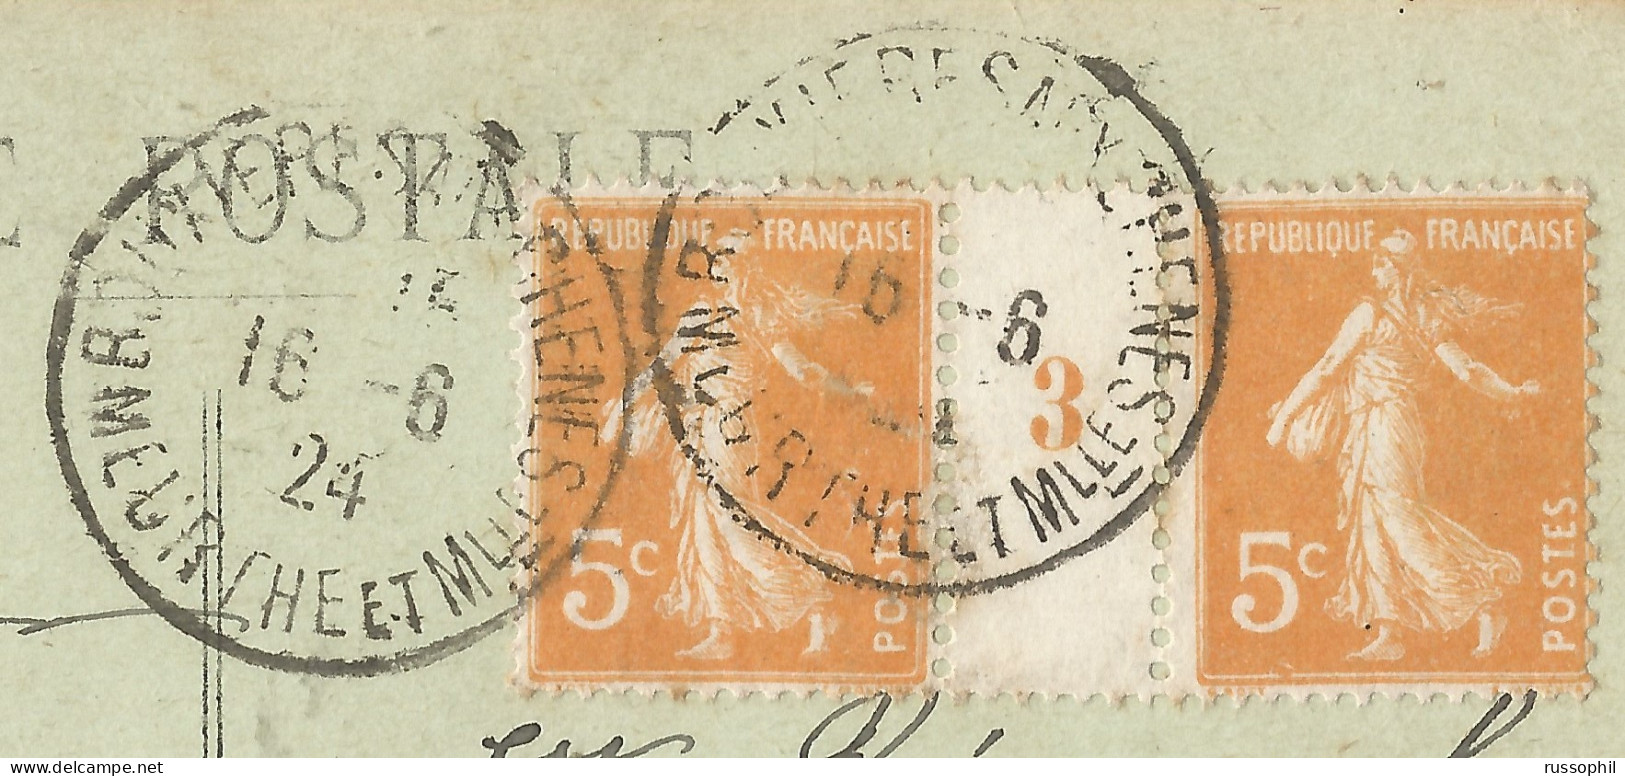 FRANCE -  MILLESIMES - PAIR Yv.  #158 MILLESIME 3 ALONE FRANKING PC FROM BOUXIERES AUX CHENES TO BAGNEUX - 1924 - Millesimi